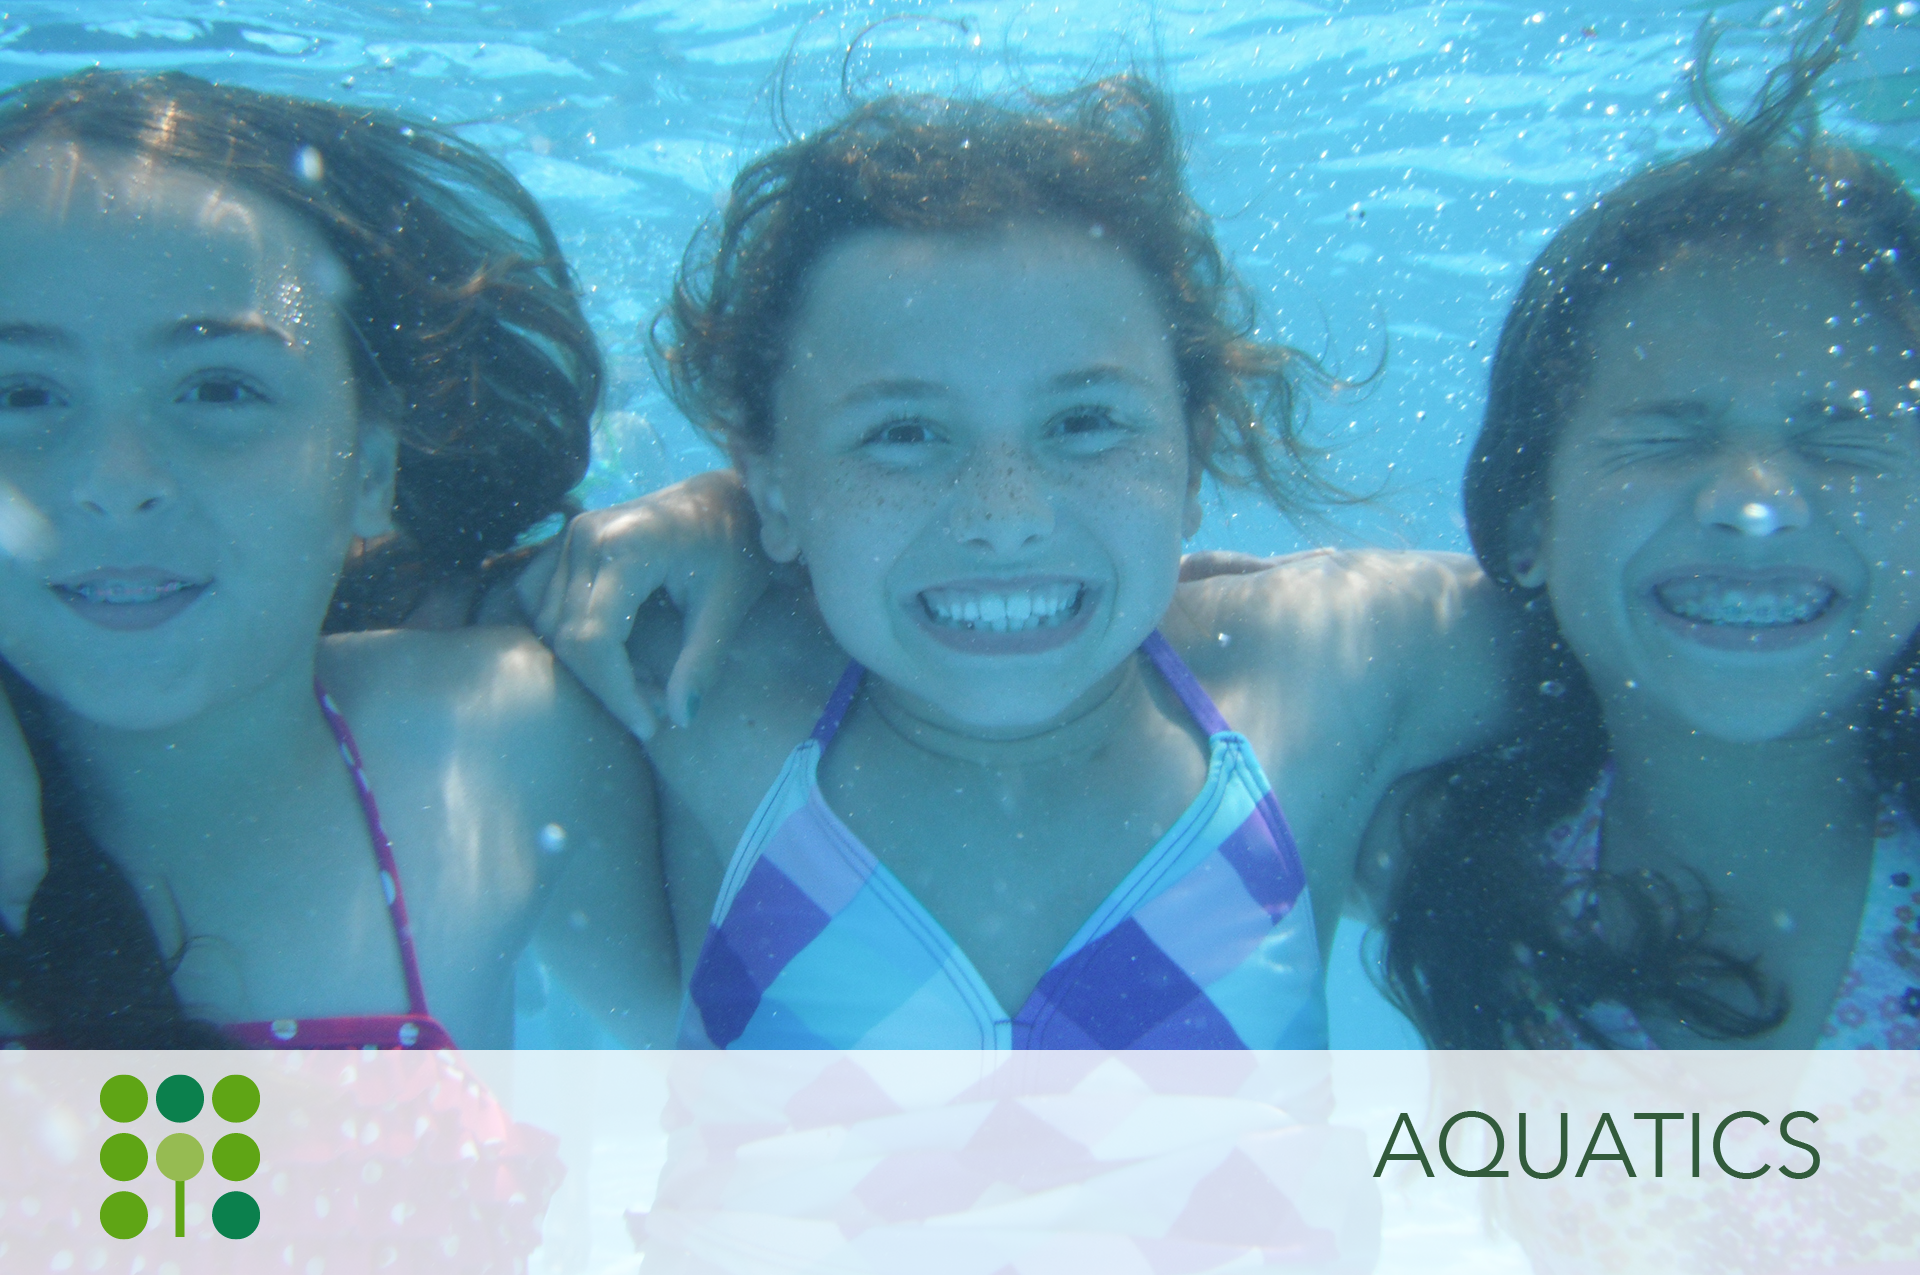 Evolution Swim Academy - Who's ready for Saturday swim lessons at